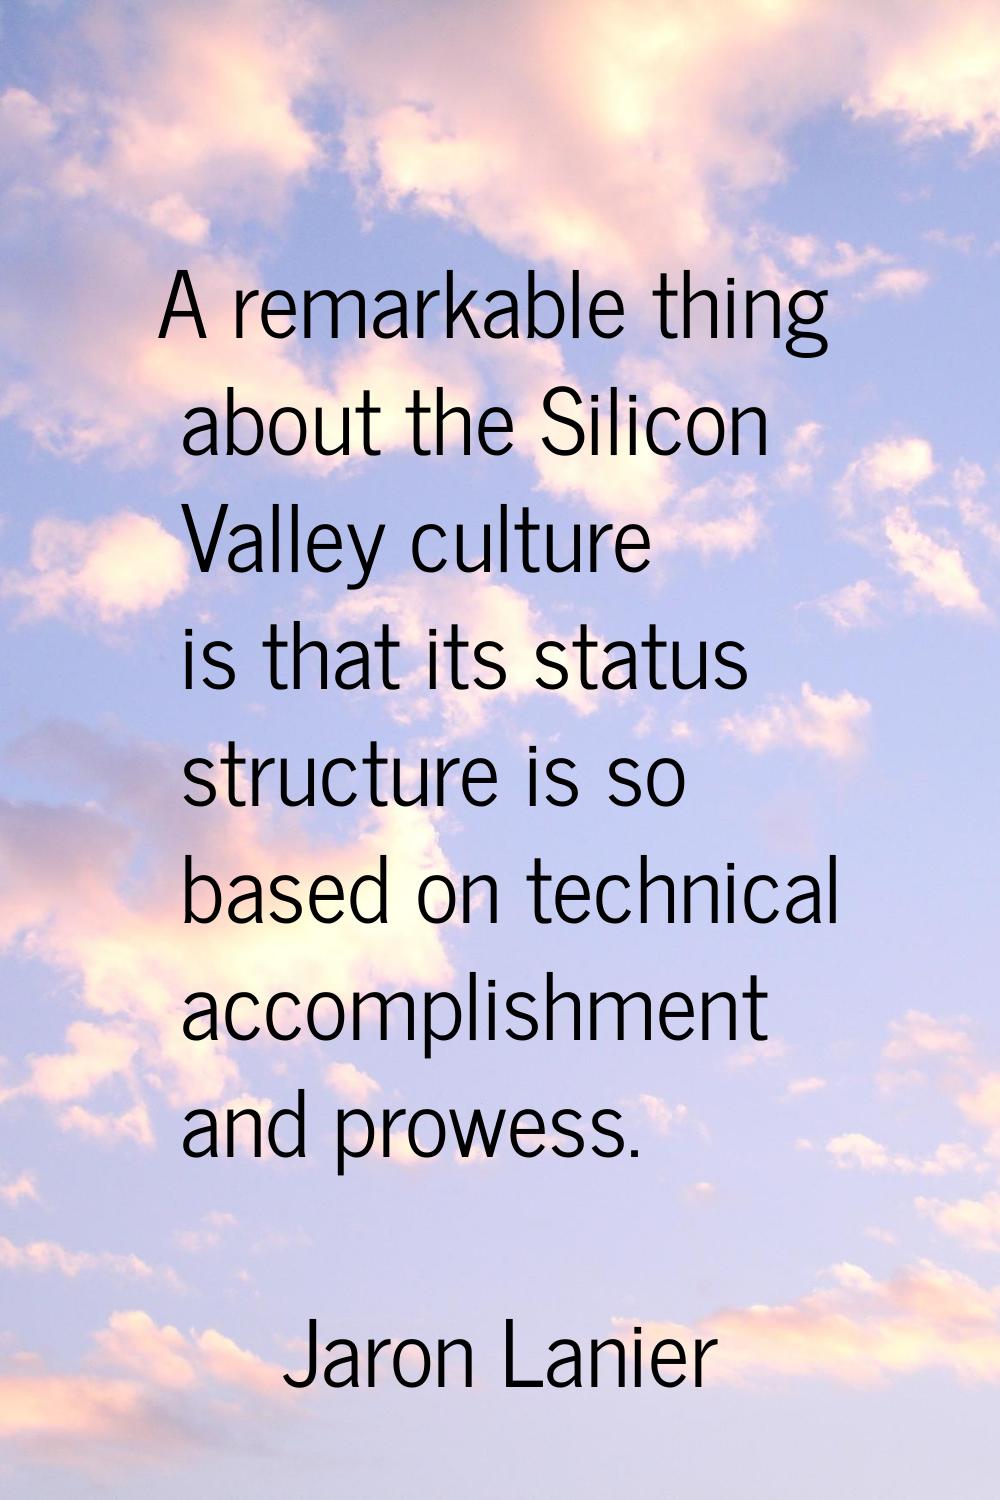 A remarkable thing about the Silicon Valley culture is that its status structure is so based on tec